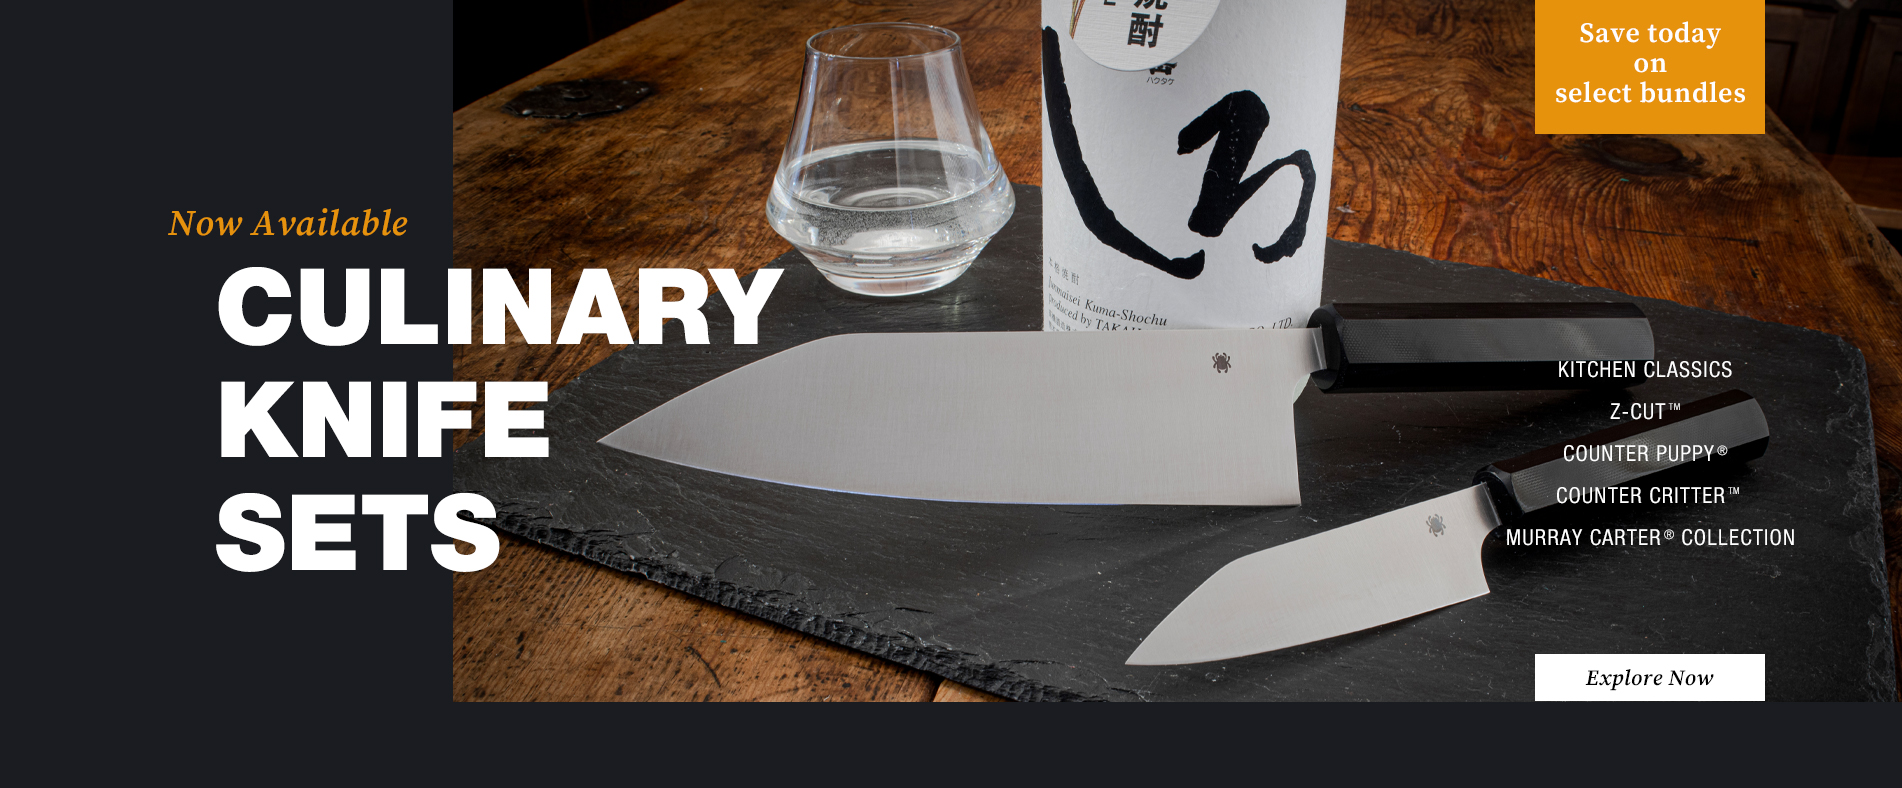 New! Spyderco Culinary Knife Sets! Click to Shop!